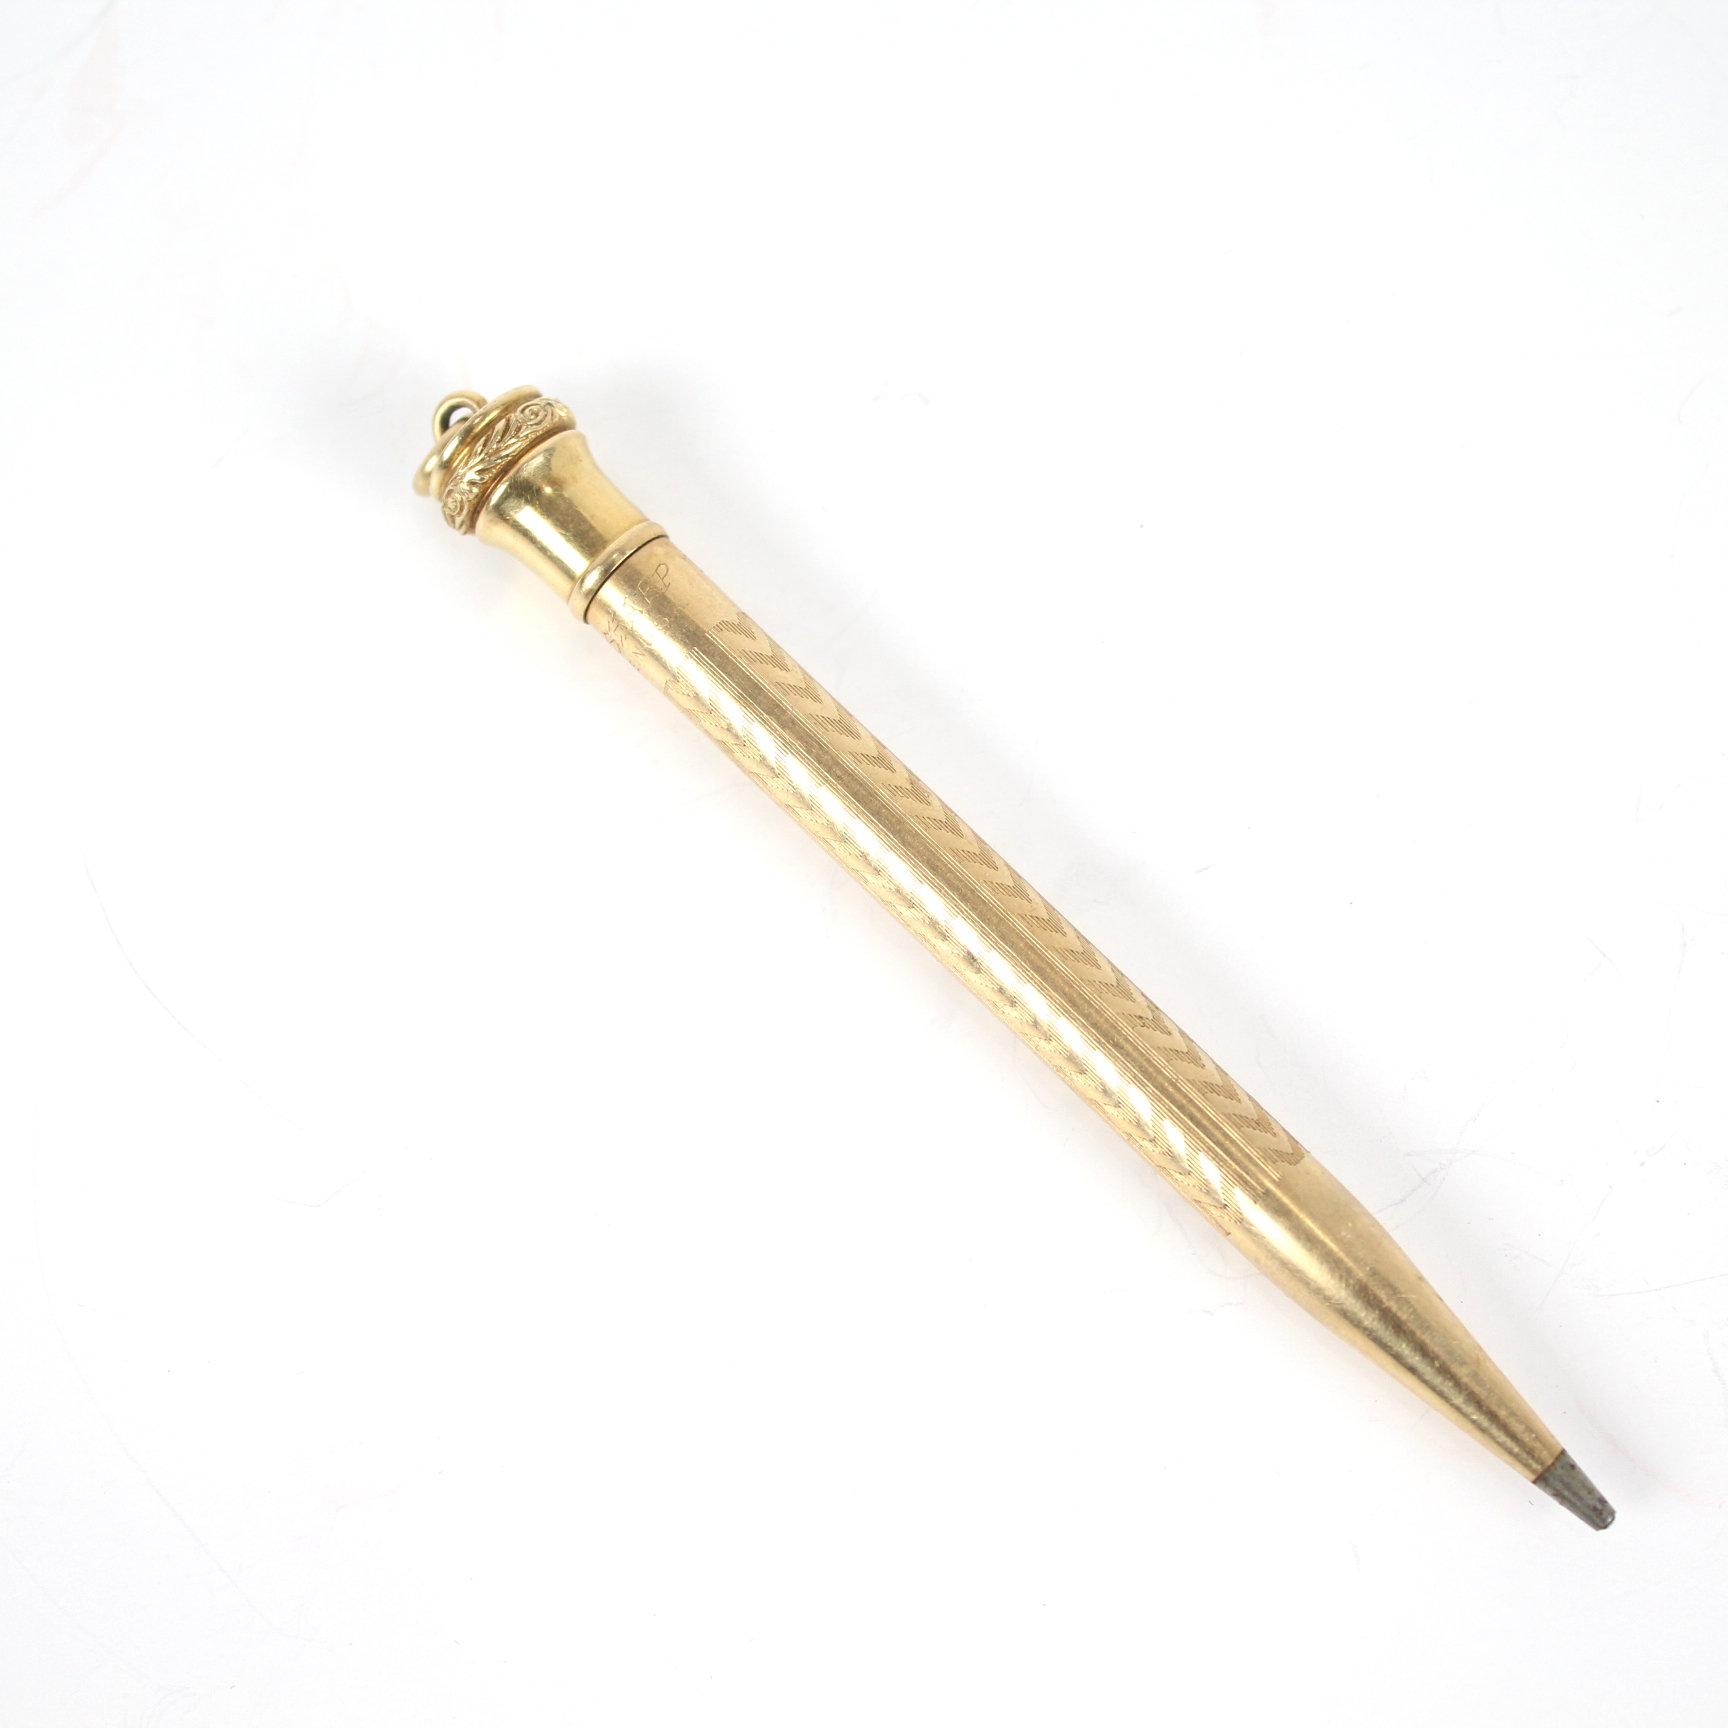 Gold Filled Wahl Eversharp Mechanical Ring Top Pencil